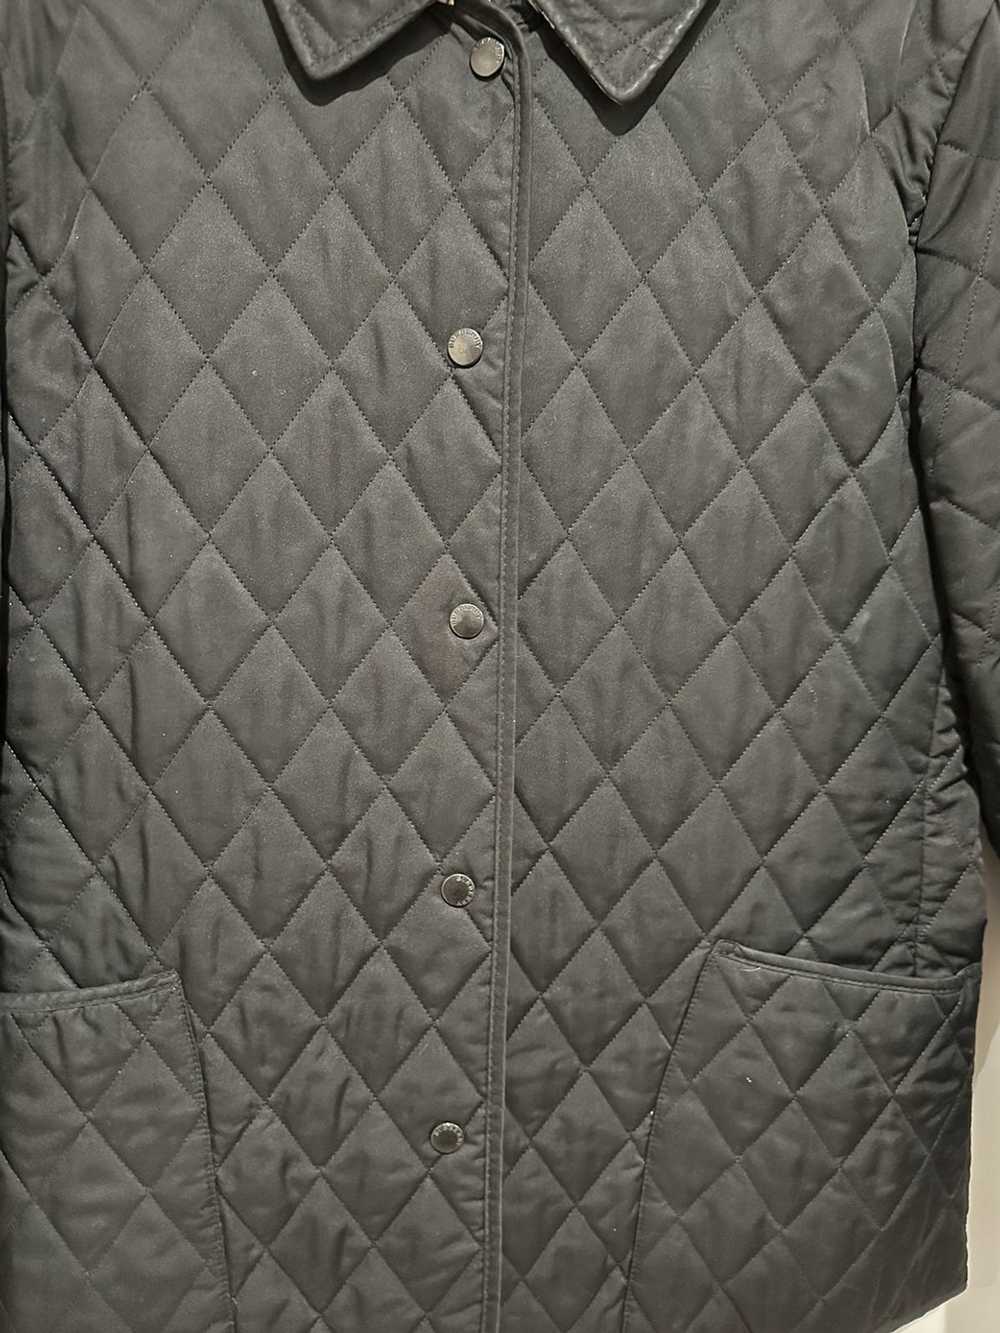 Burberry Burberry Quilt Jacket - image 2